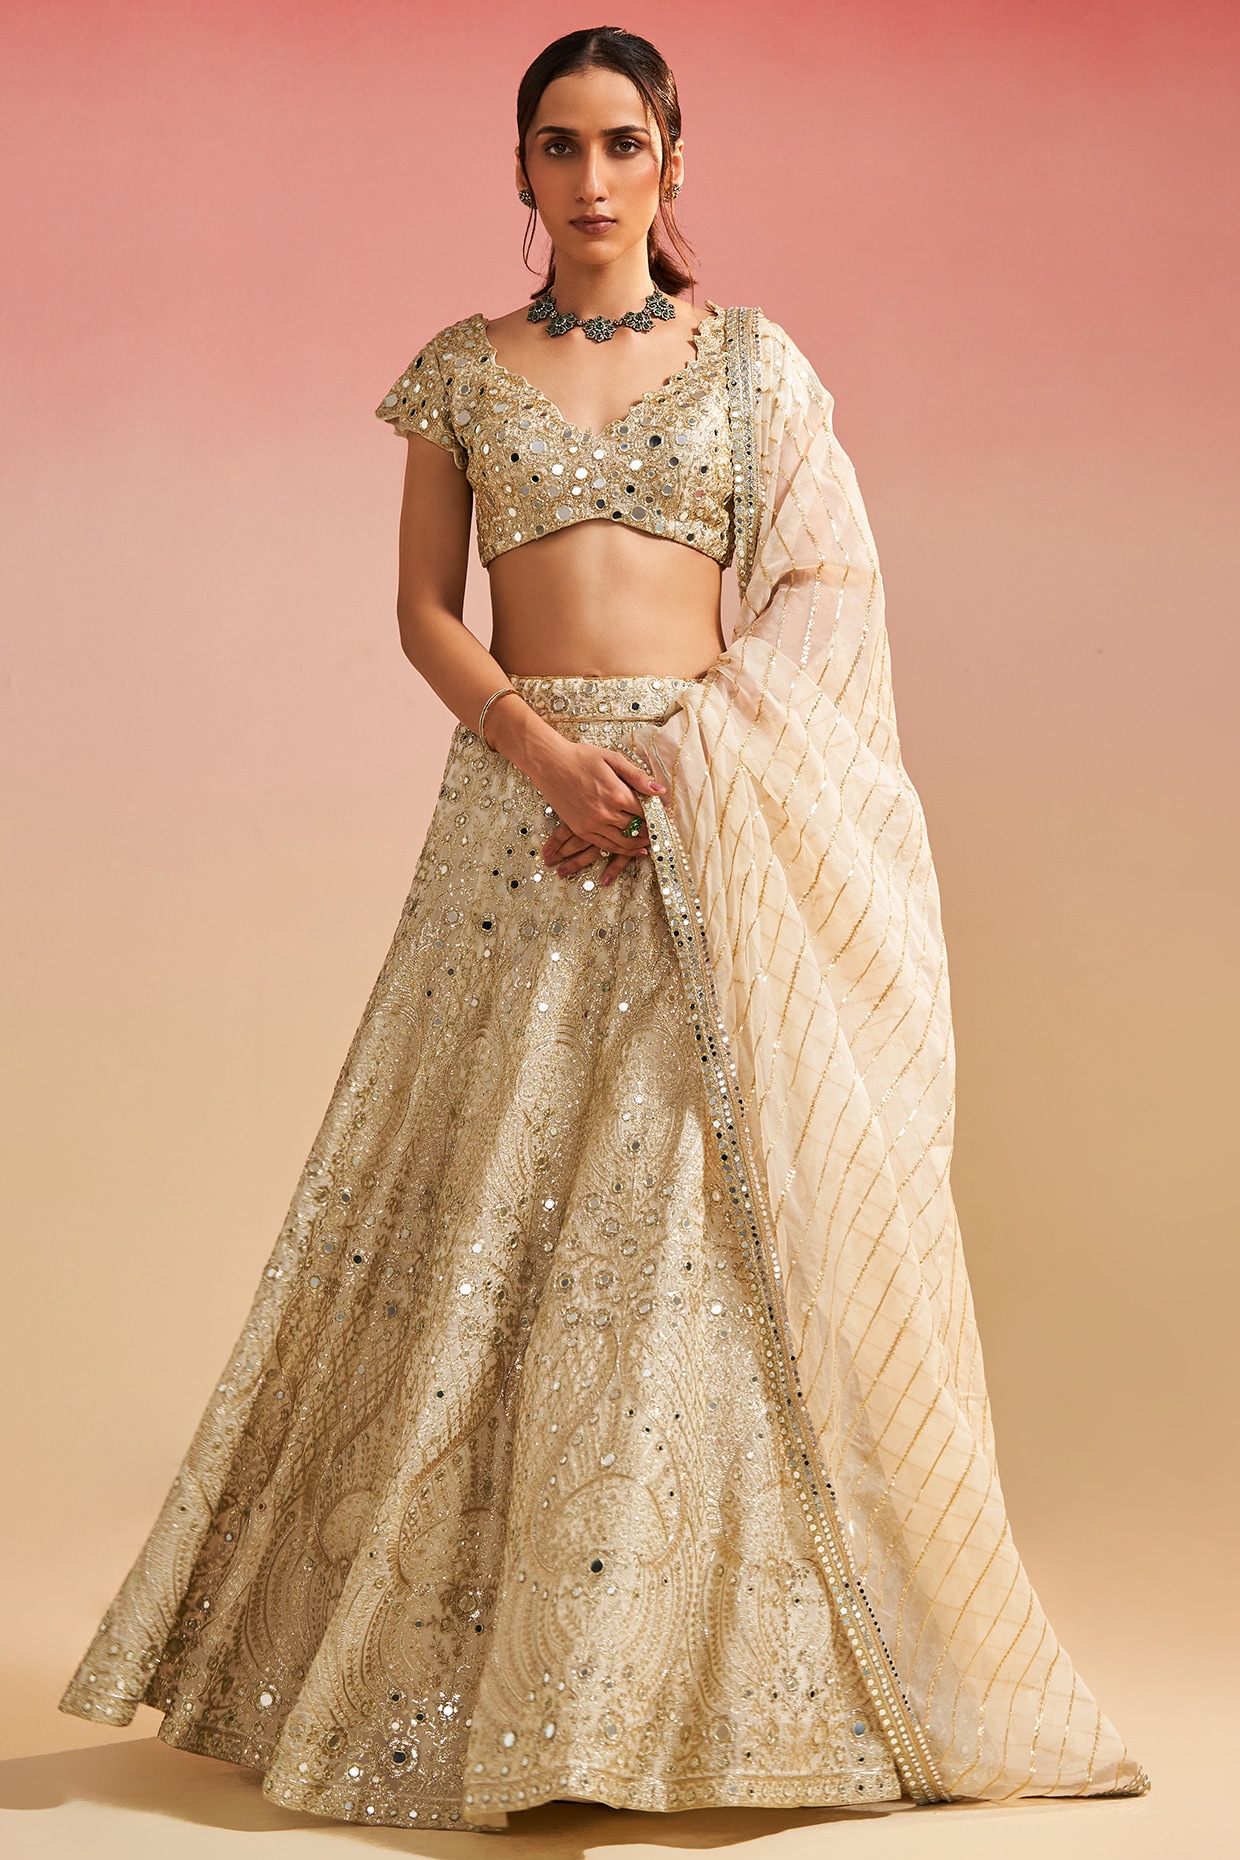 Lowest price | Off White Casual Brocade Bridal Lehenga Choli, Off White  Casual Brocade Bridal Lehengas and Off White Casual Brocade Bridal Ghagra  Chaniya Cholis online shopping